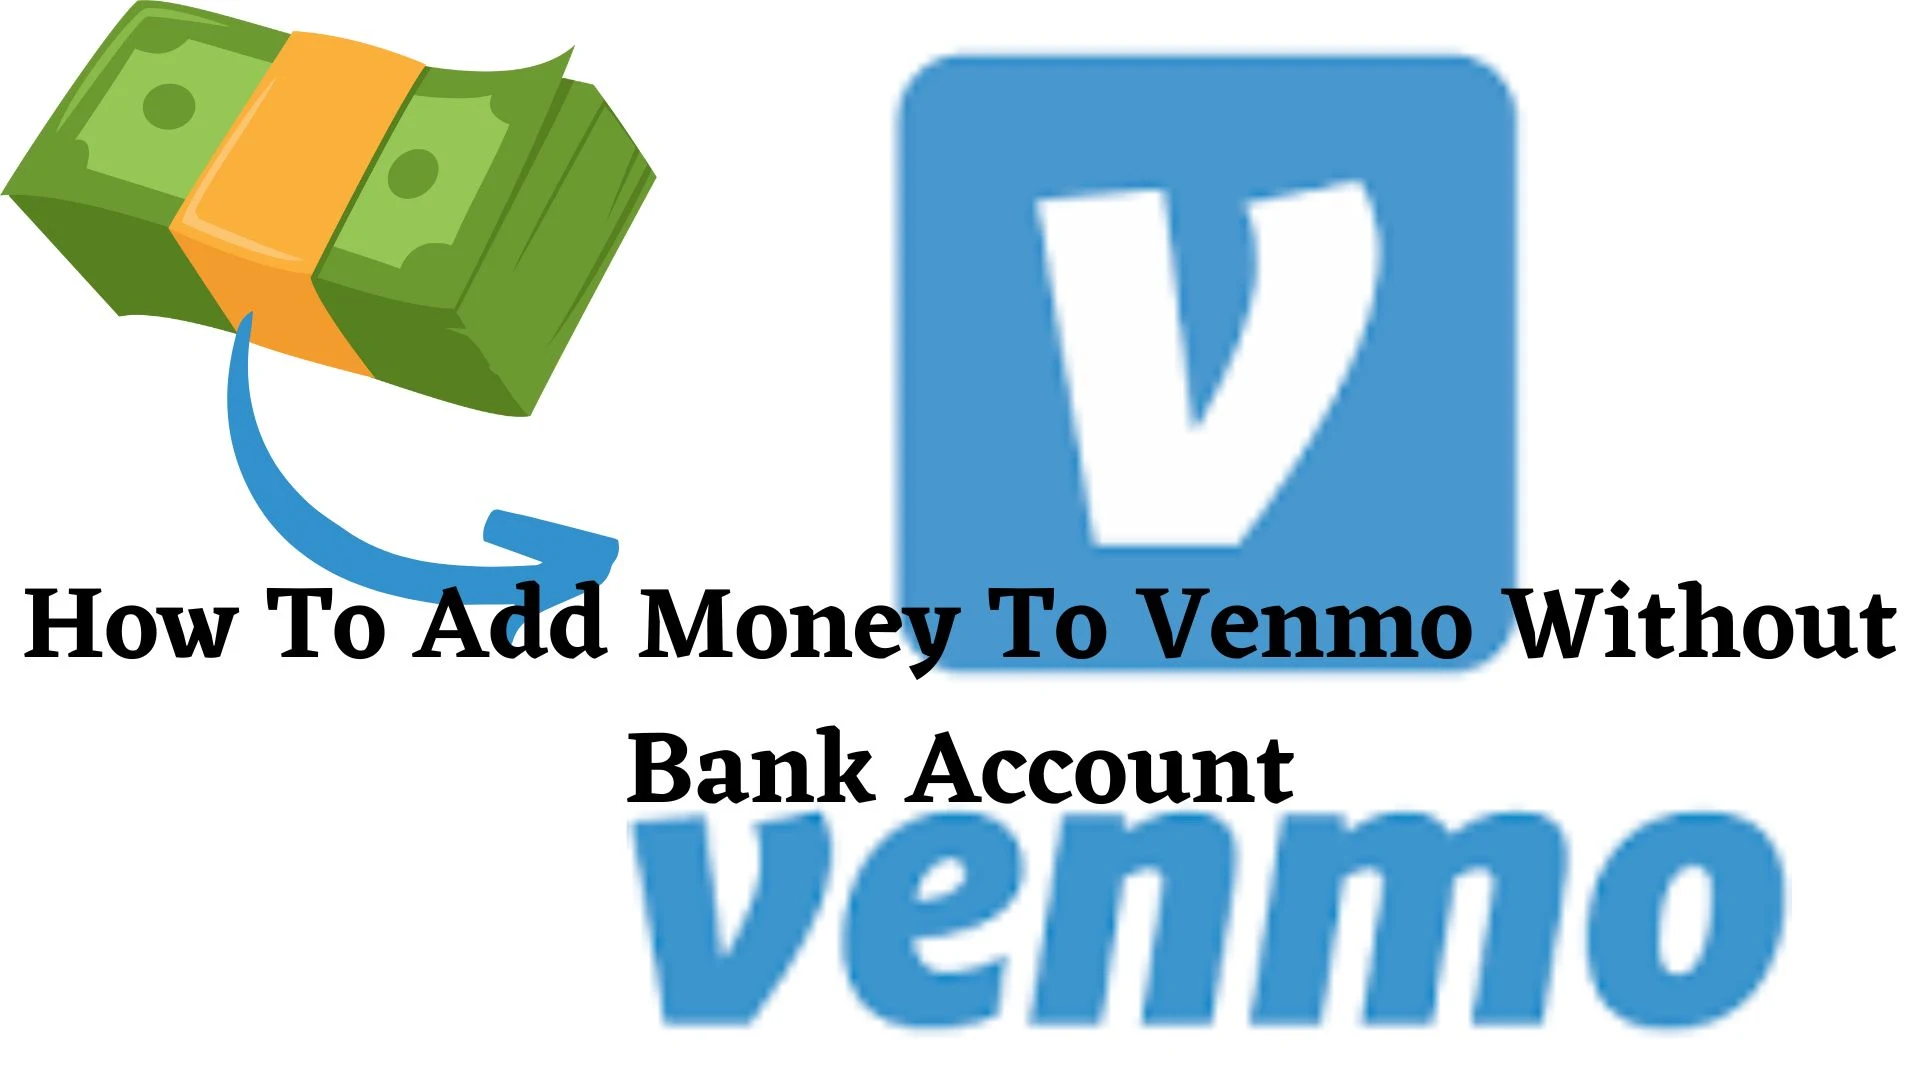 Add Money To Venmo Without Bank Account